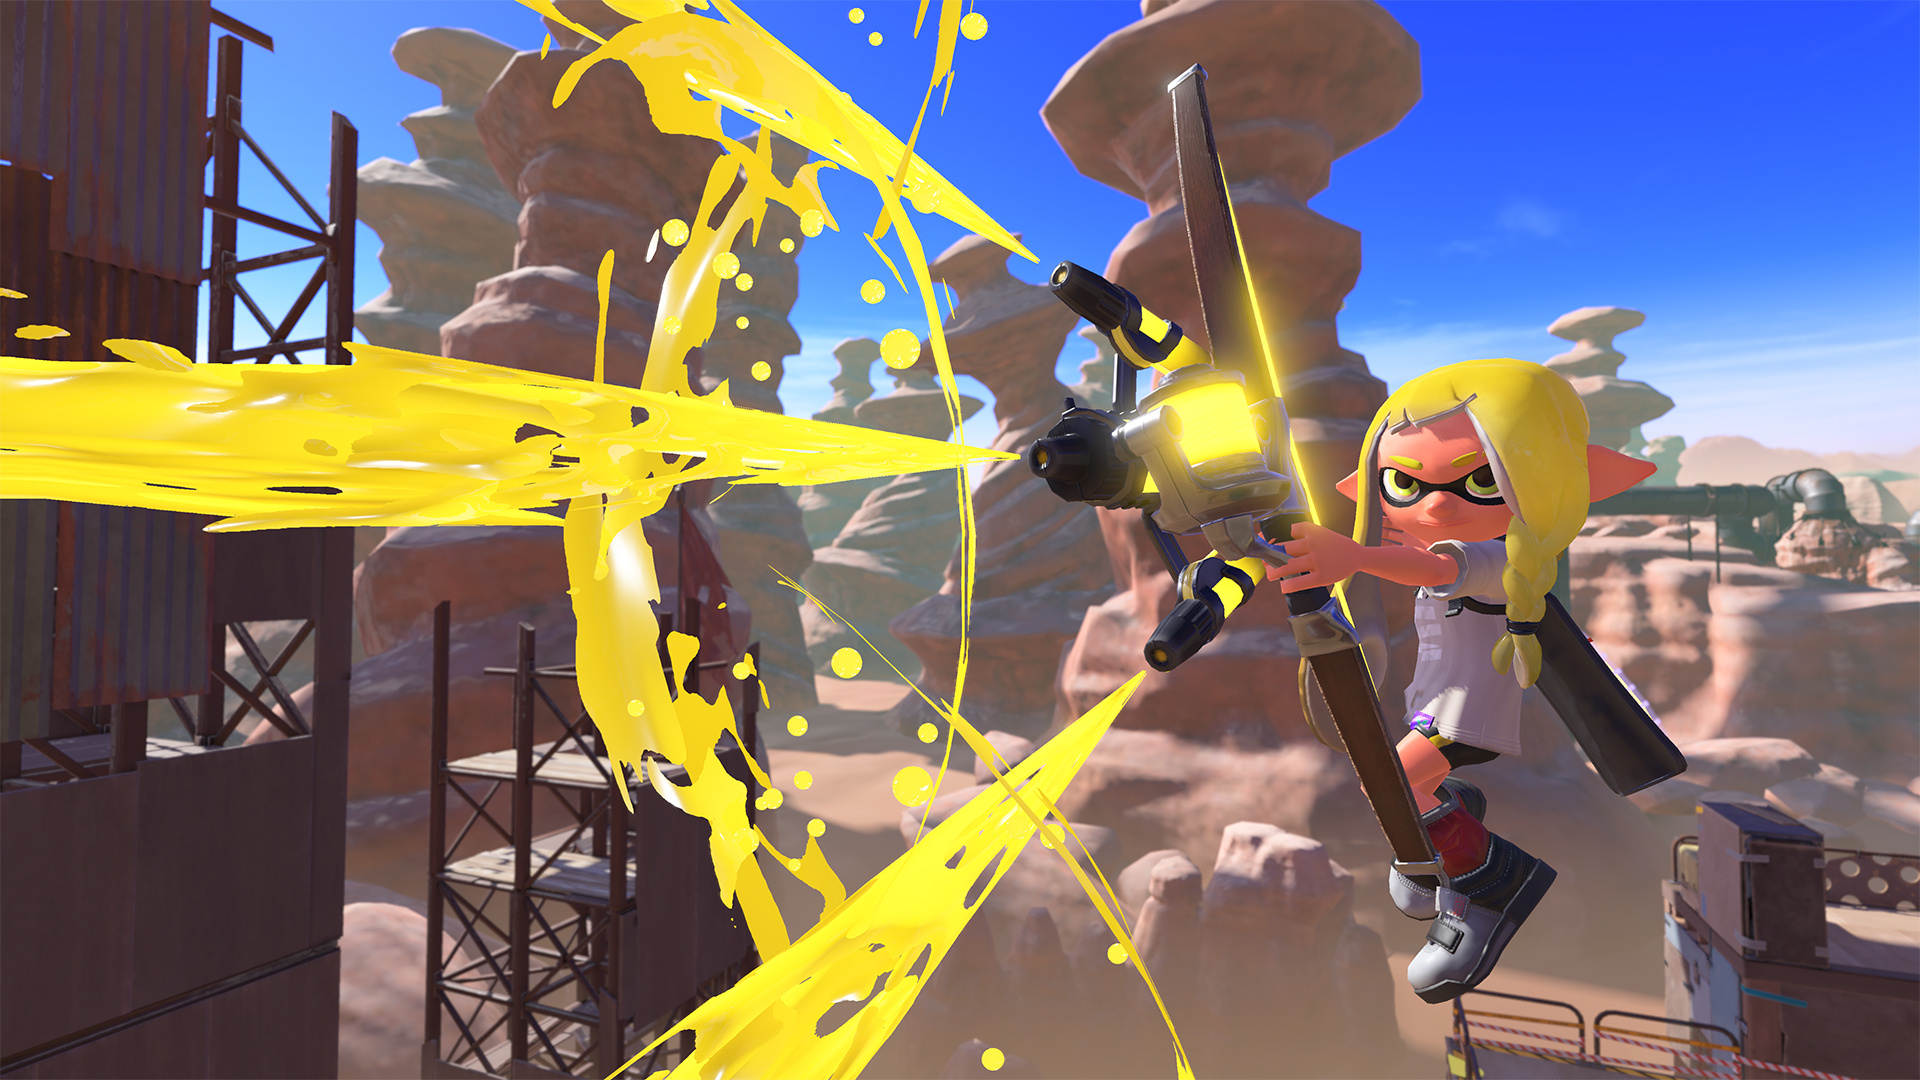 Splatoon 3: A 3rd-person shooter game, Focused on online multiplayer ink battles. 1920x1080 Full HD Wallpaper.